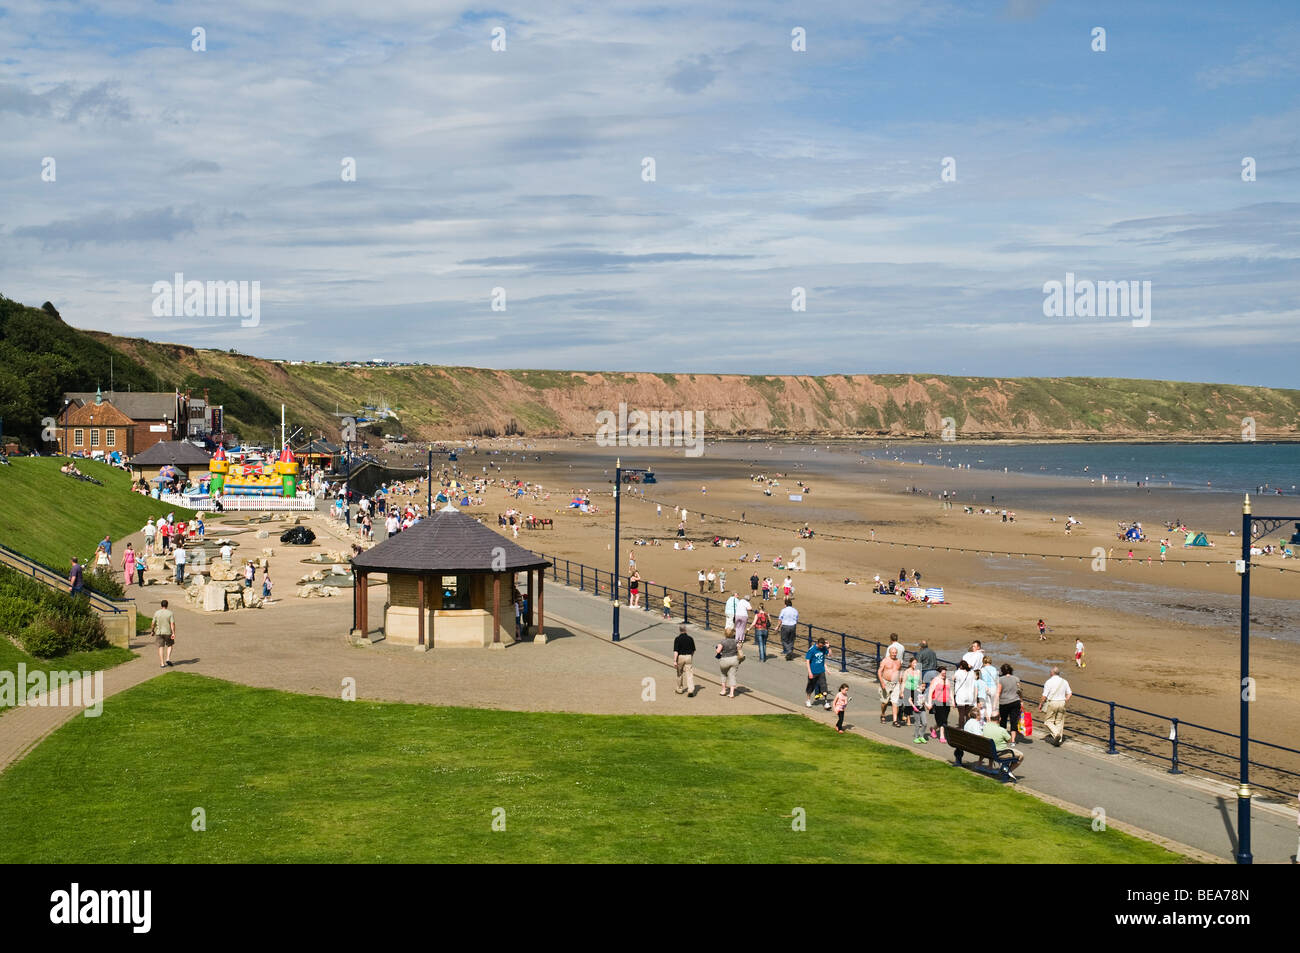 dh Filey seafront promenade FILEY NORTH YORKSHIRE Holidaymakers holiday resort uk seasides english seaside beach Stock Photo